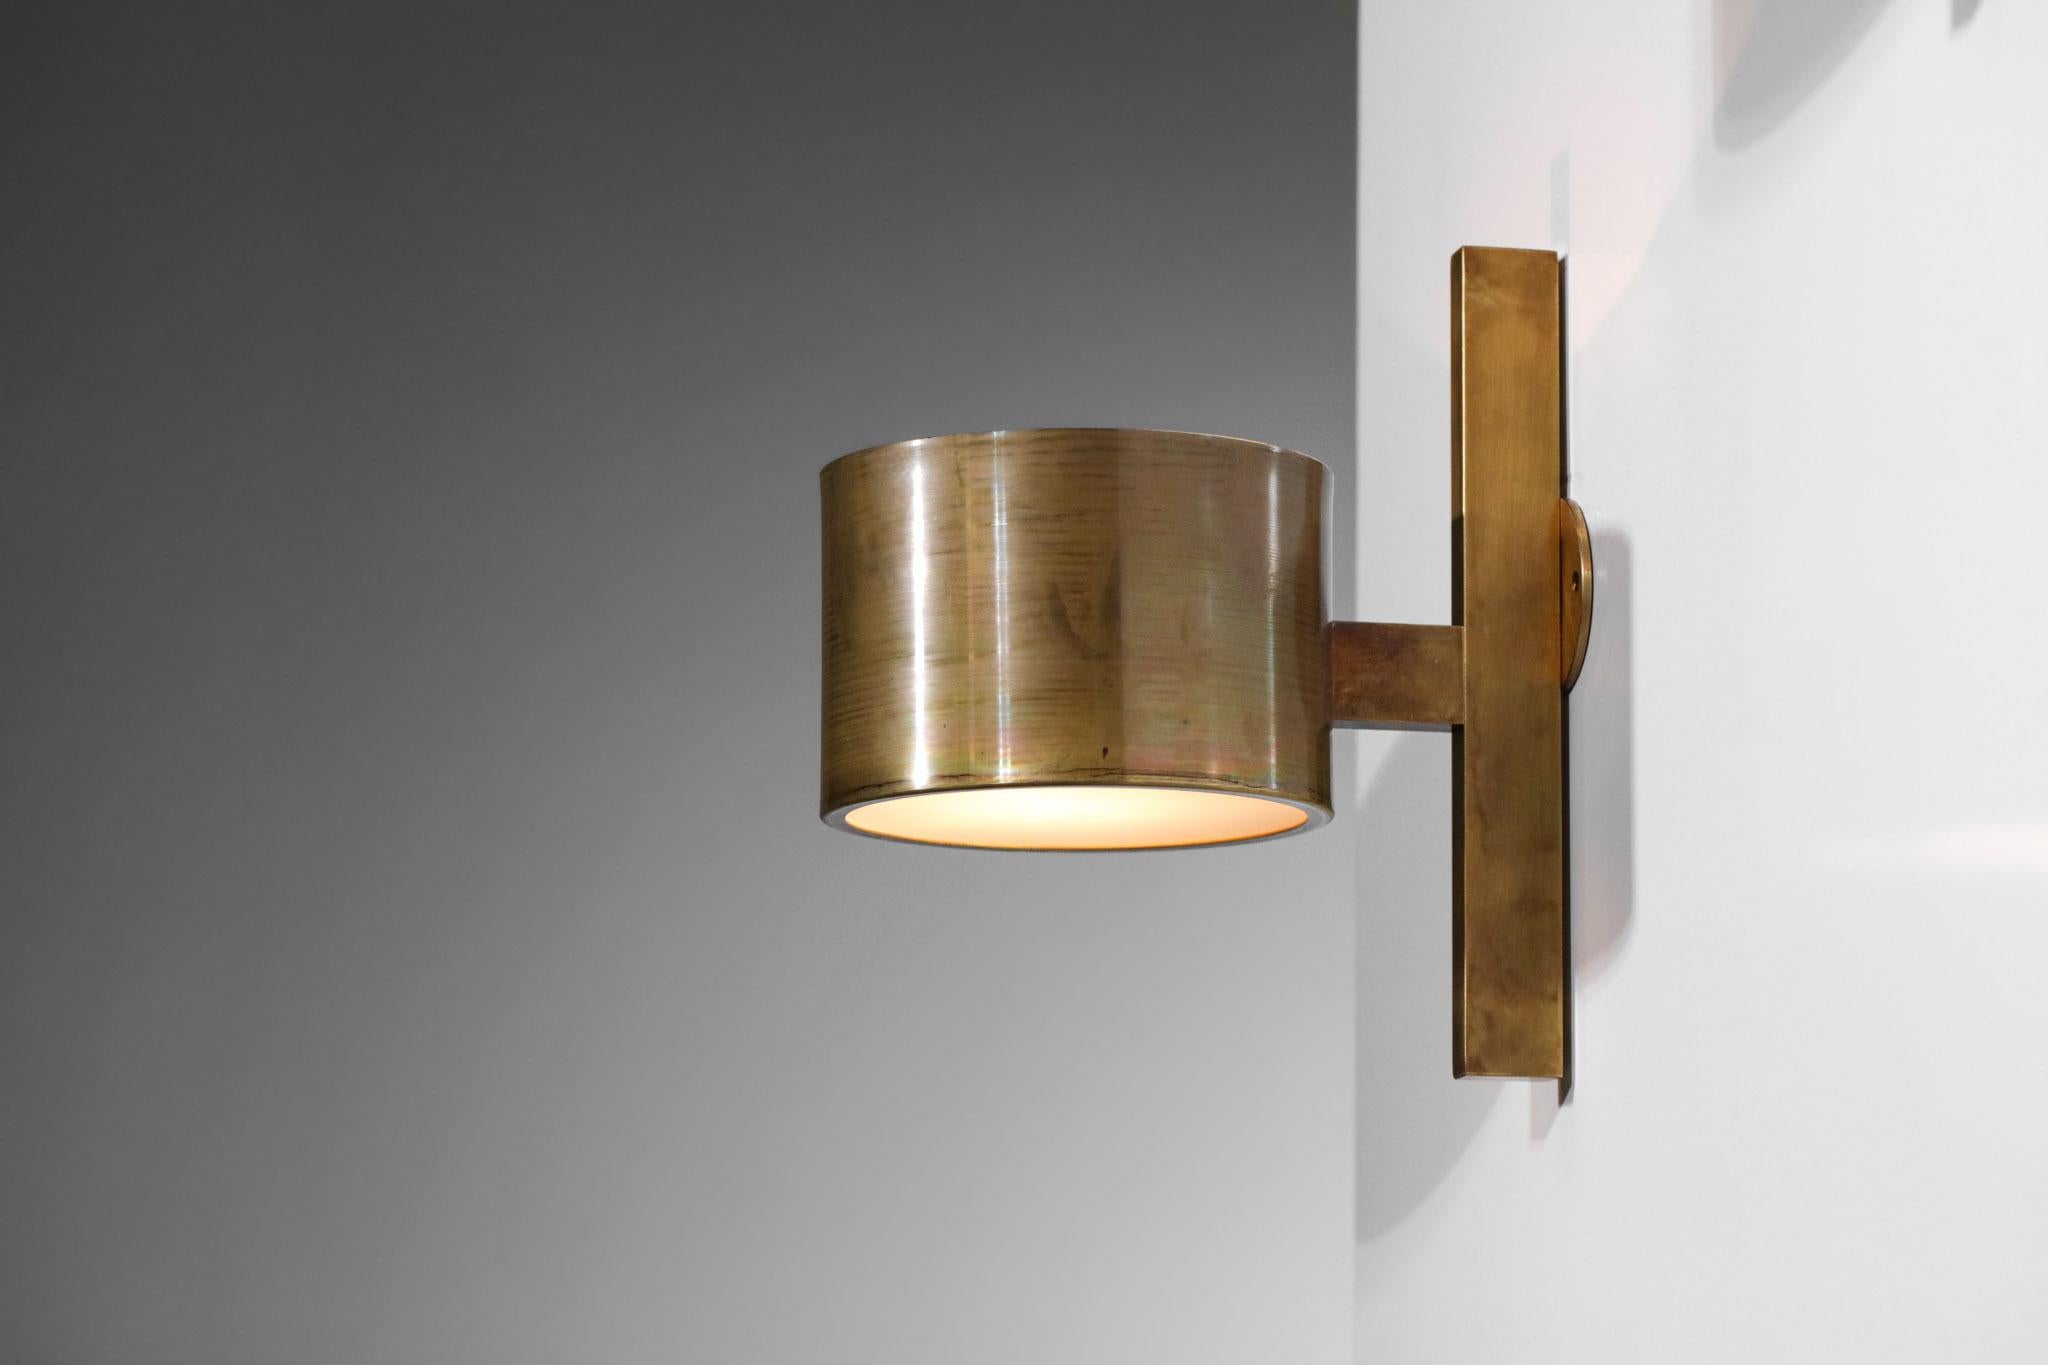 European Pair of Modern Solid Brass Sconces in the Style of Hans Agne Jakobsson, EL135 For Sale